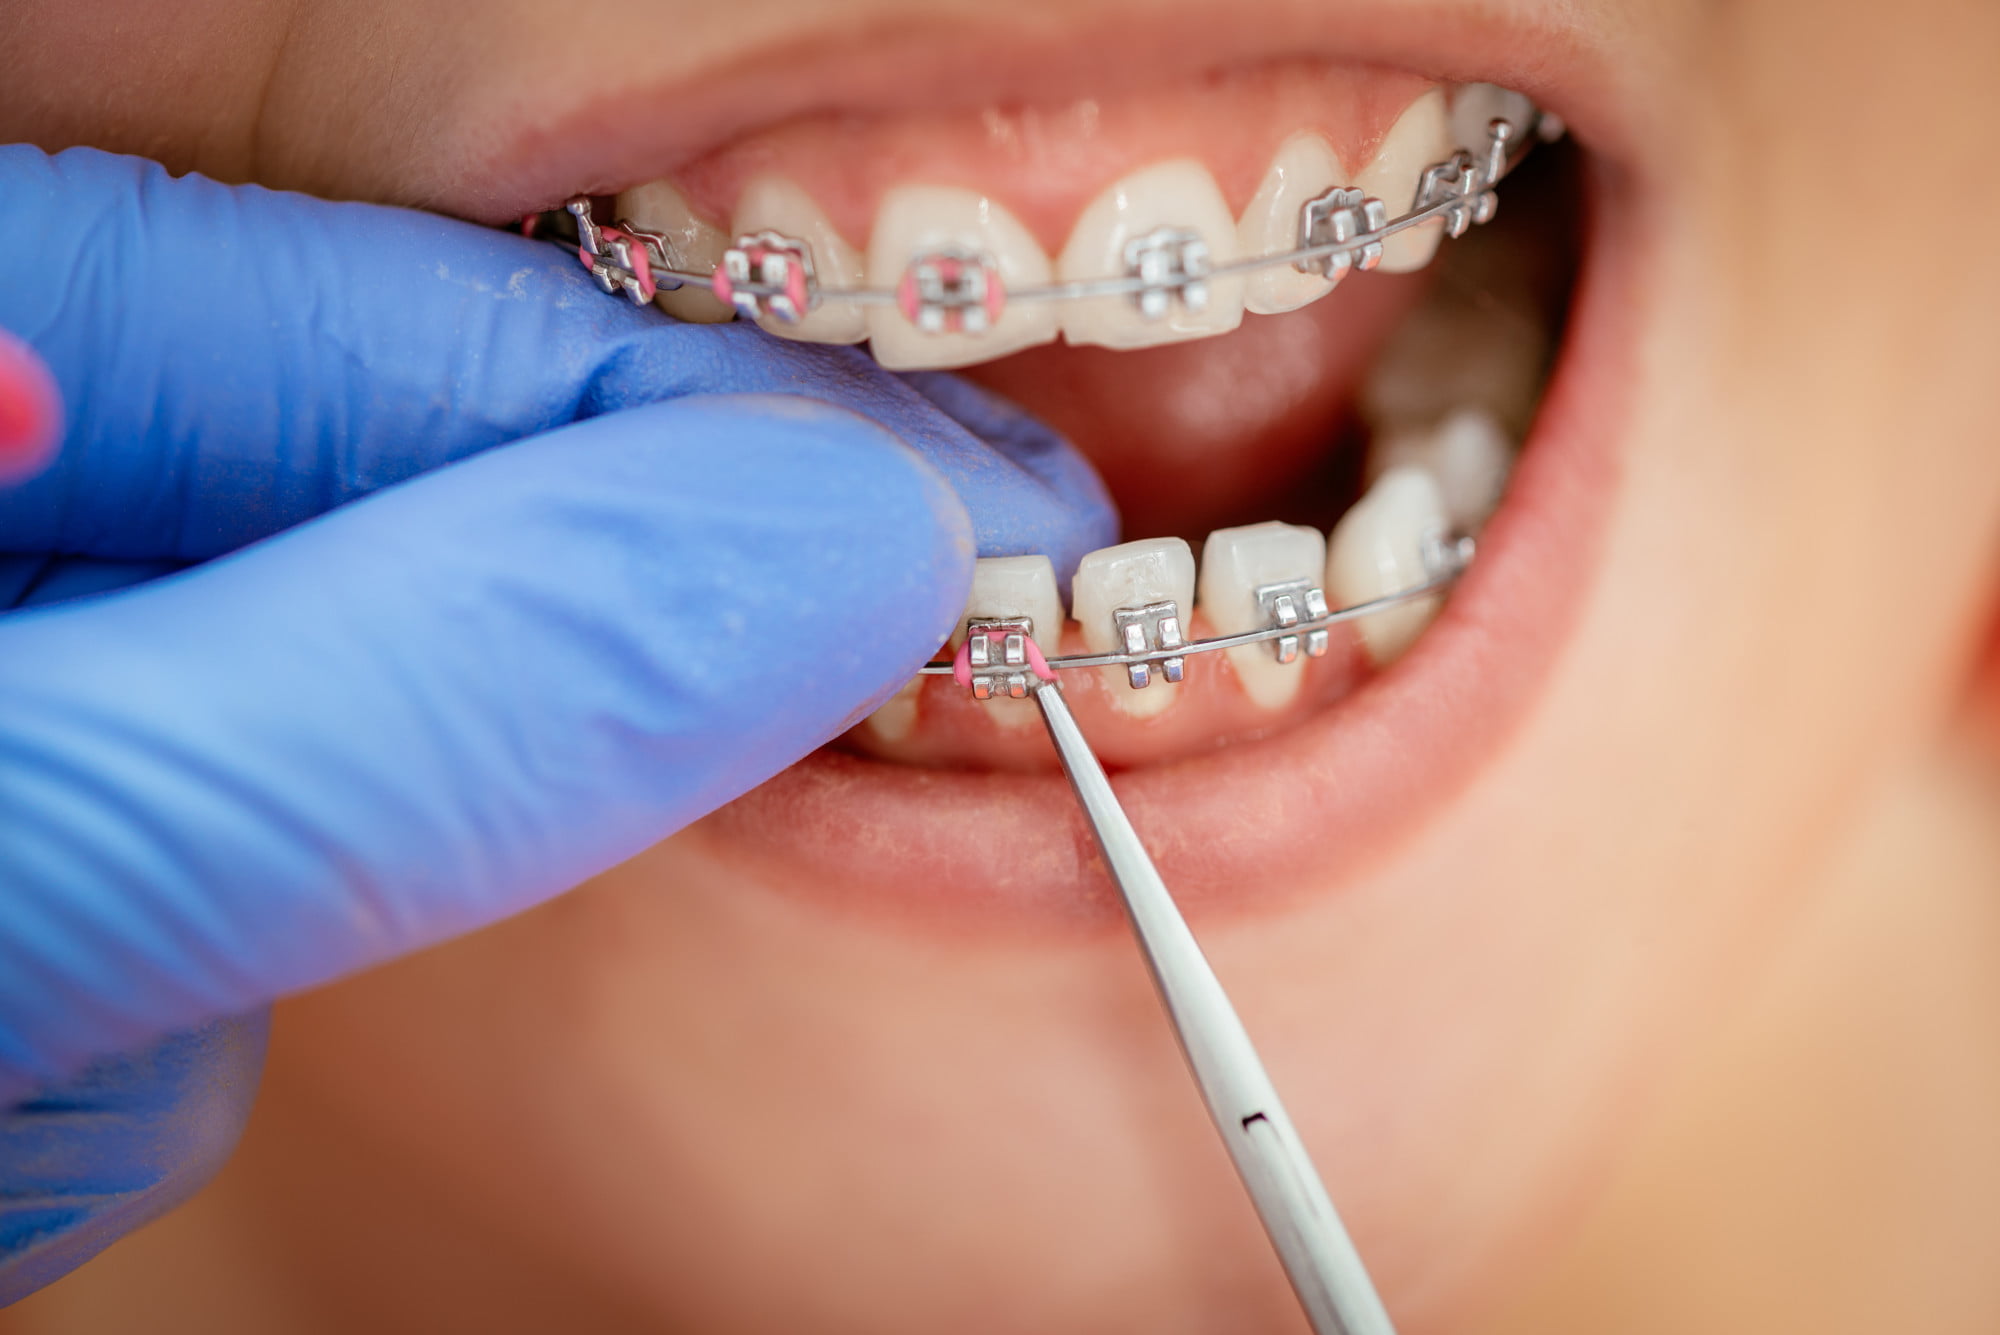 If you want to make sure your braces keep your teeth aligned, this guide can help. Here are common errors with wearing braces and how to avoid them.